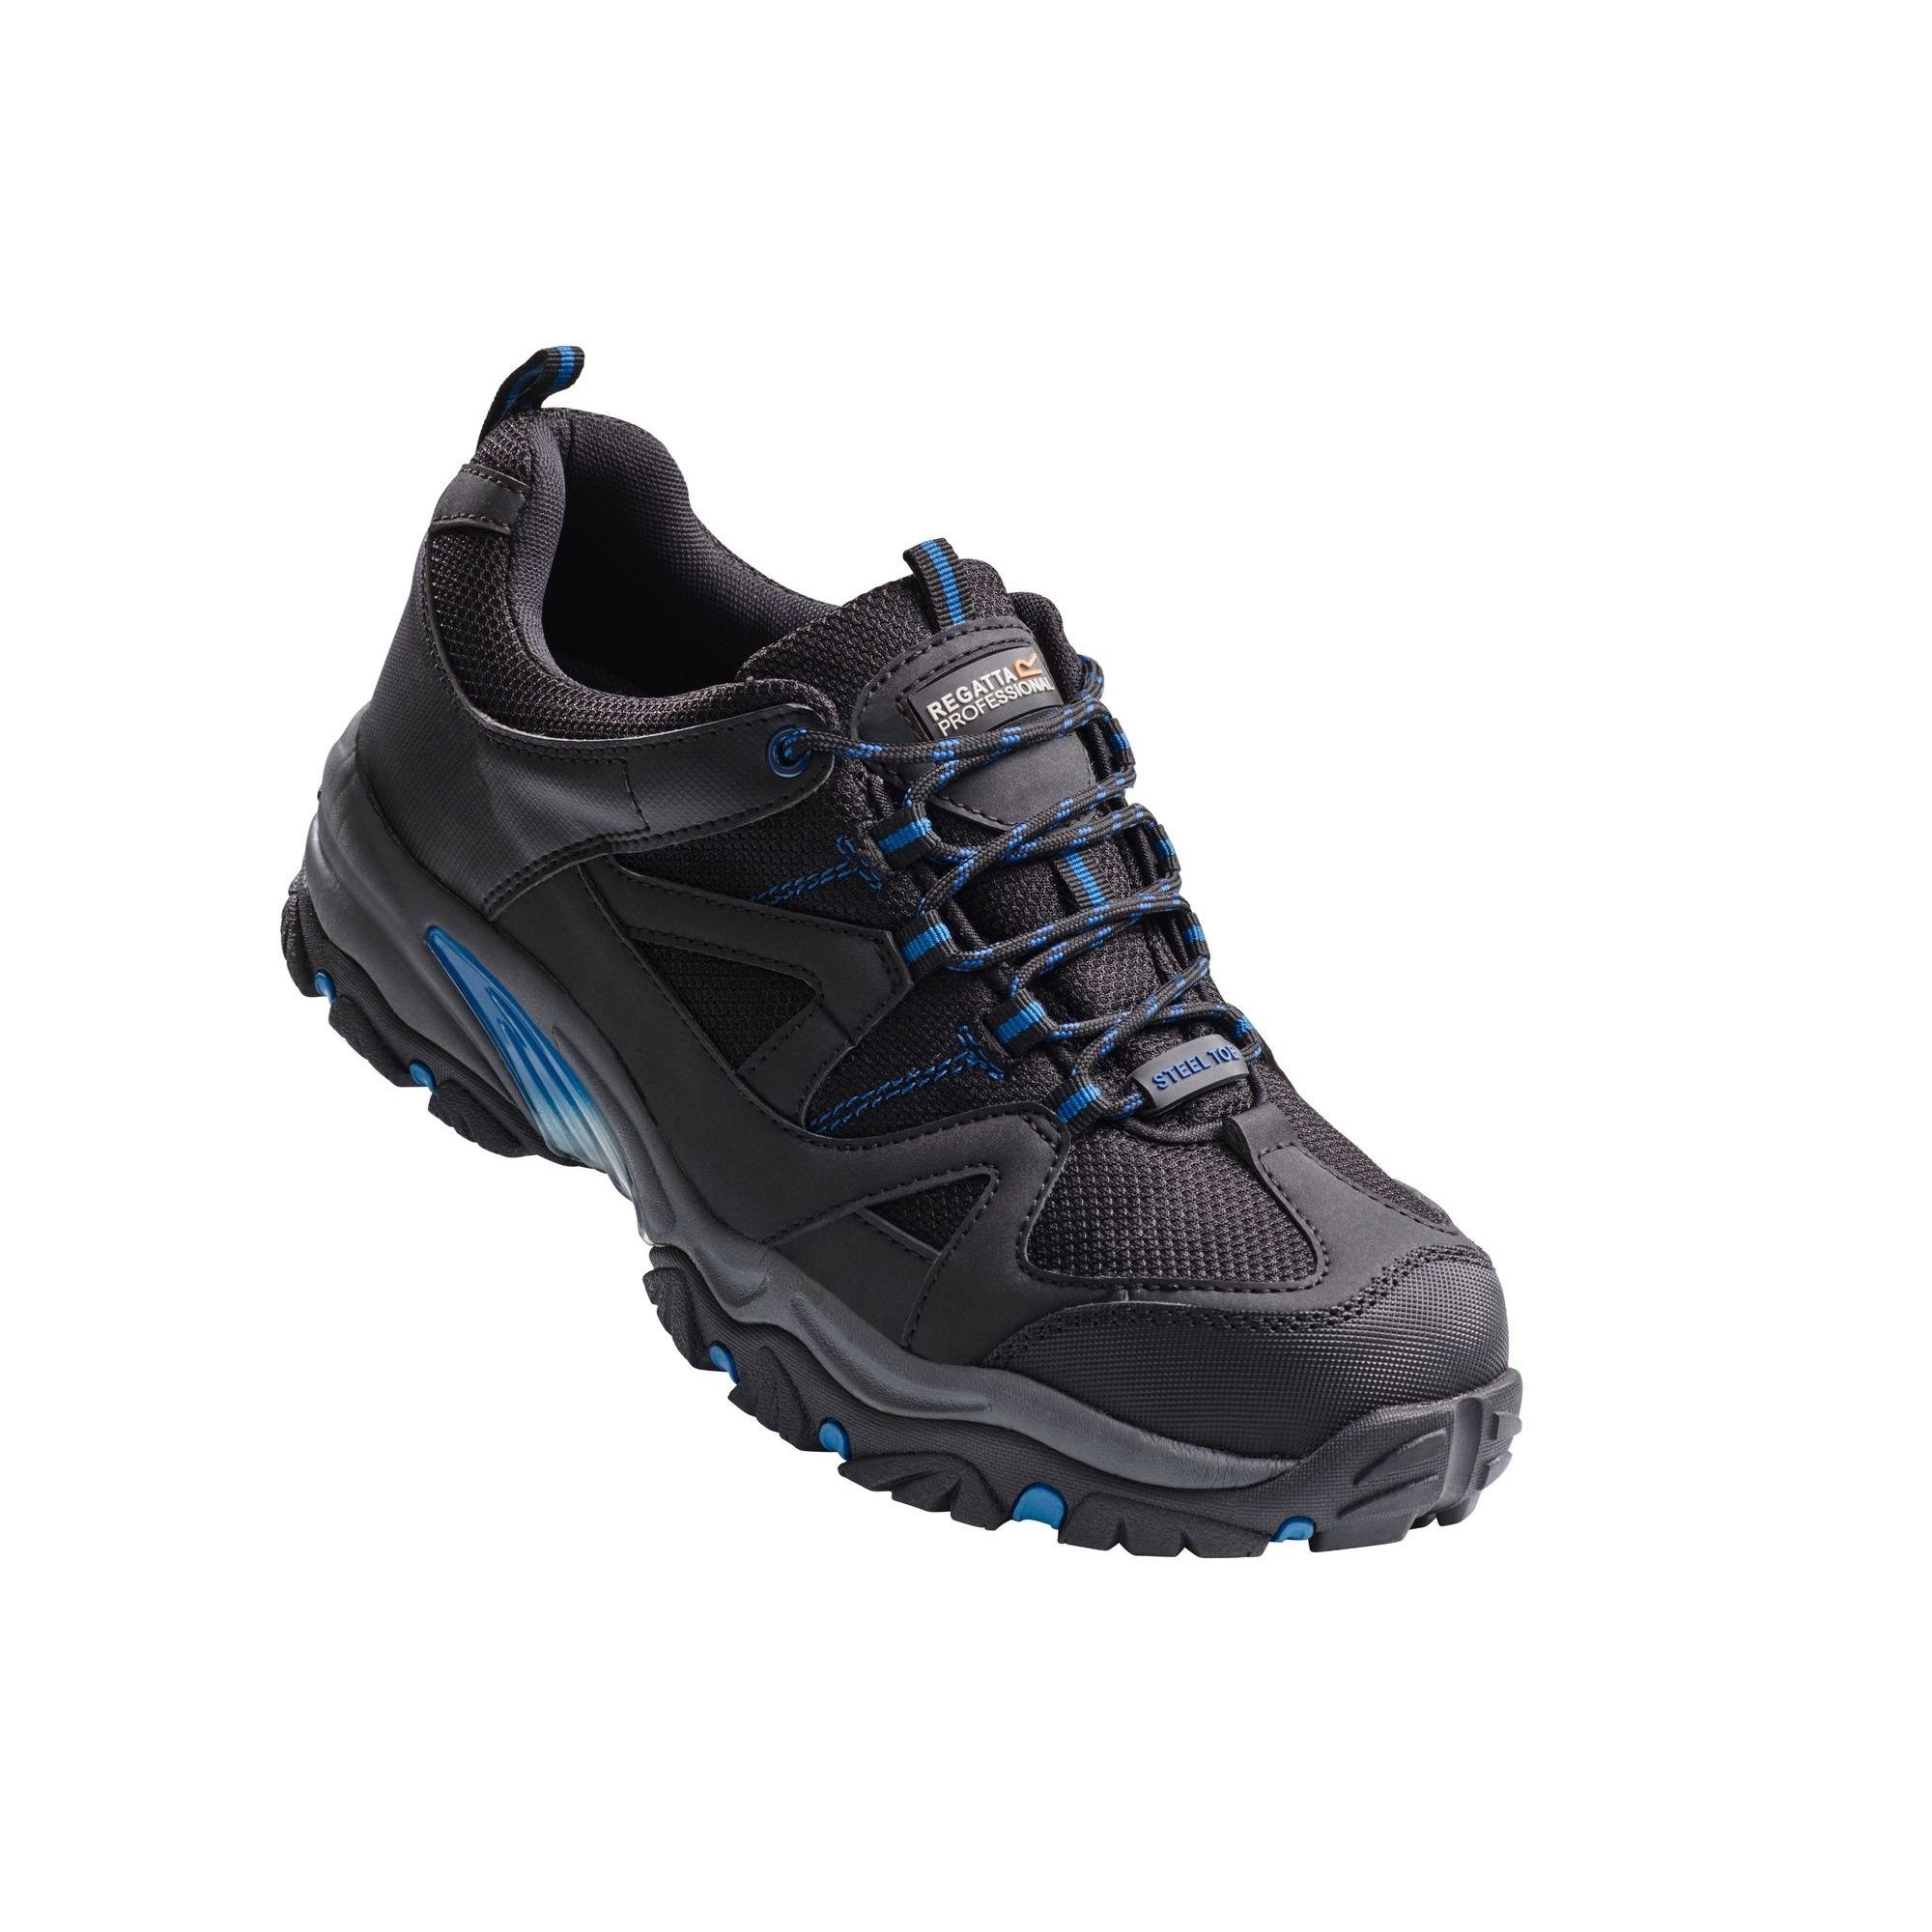 Mens safety trainers. Steel toe cap. Protective steel midsole. Leather/PU/mesh upper. Fuel oil resistant outsole. Rubber/EVA shock absorbent sole. Anti-static sole. Fully moulded and removable insole. Wide fitting. Safety rating EN20345: 2011 S1-P SRC. 200 joule safety toe cap. Penetration resistant midsole. Energy absorbing cushioned heel. SRC rated slip resistance. Upper composition: 4.60% Action Leather, 29.26% PU, 26.83% Mesh, 28.30% Mesh Lining, 6.95% Foam, 4.06% Chemical Fibre. Outsole composition: 50% EVA, 45% Rubber, 5% TPU.